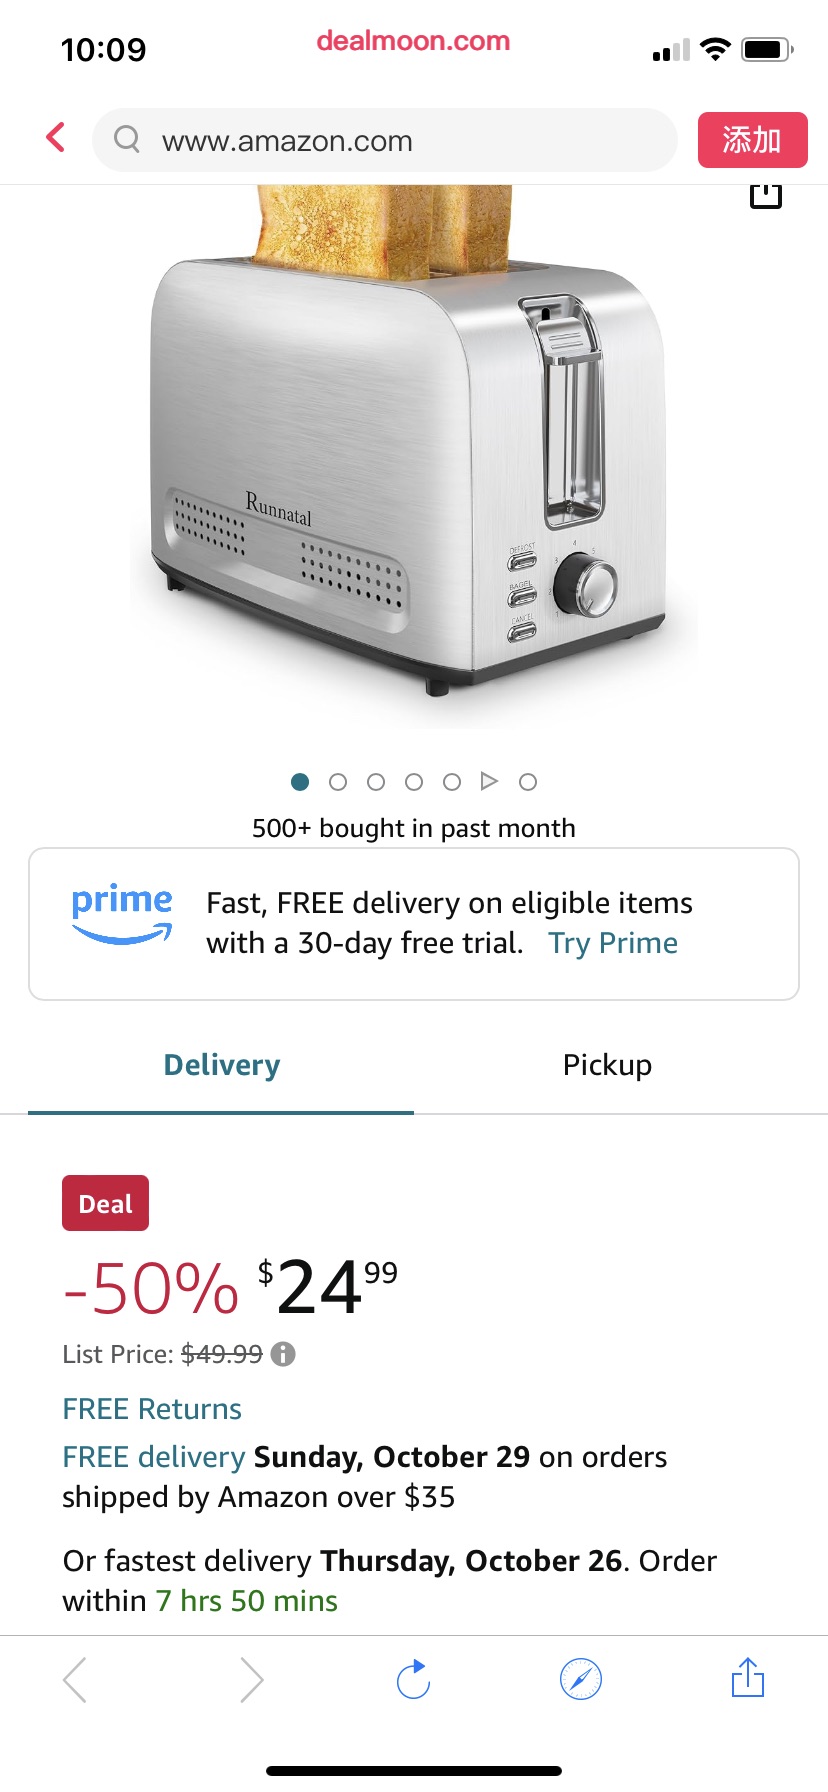 Amazon.com: Runnatal 2 Slice Slot Toaster, Stainless Steel, Extra-Wide Slot Toaster with 7 Shade Settings, Silver Metallic: Home & Kitchen超宽不锈钢吐司机